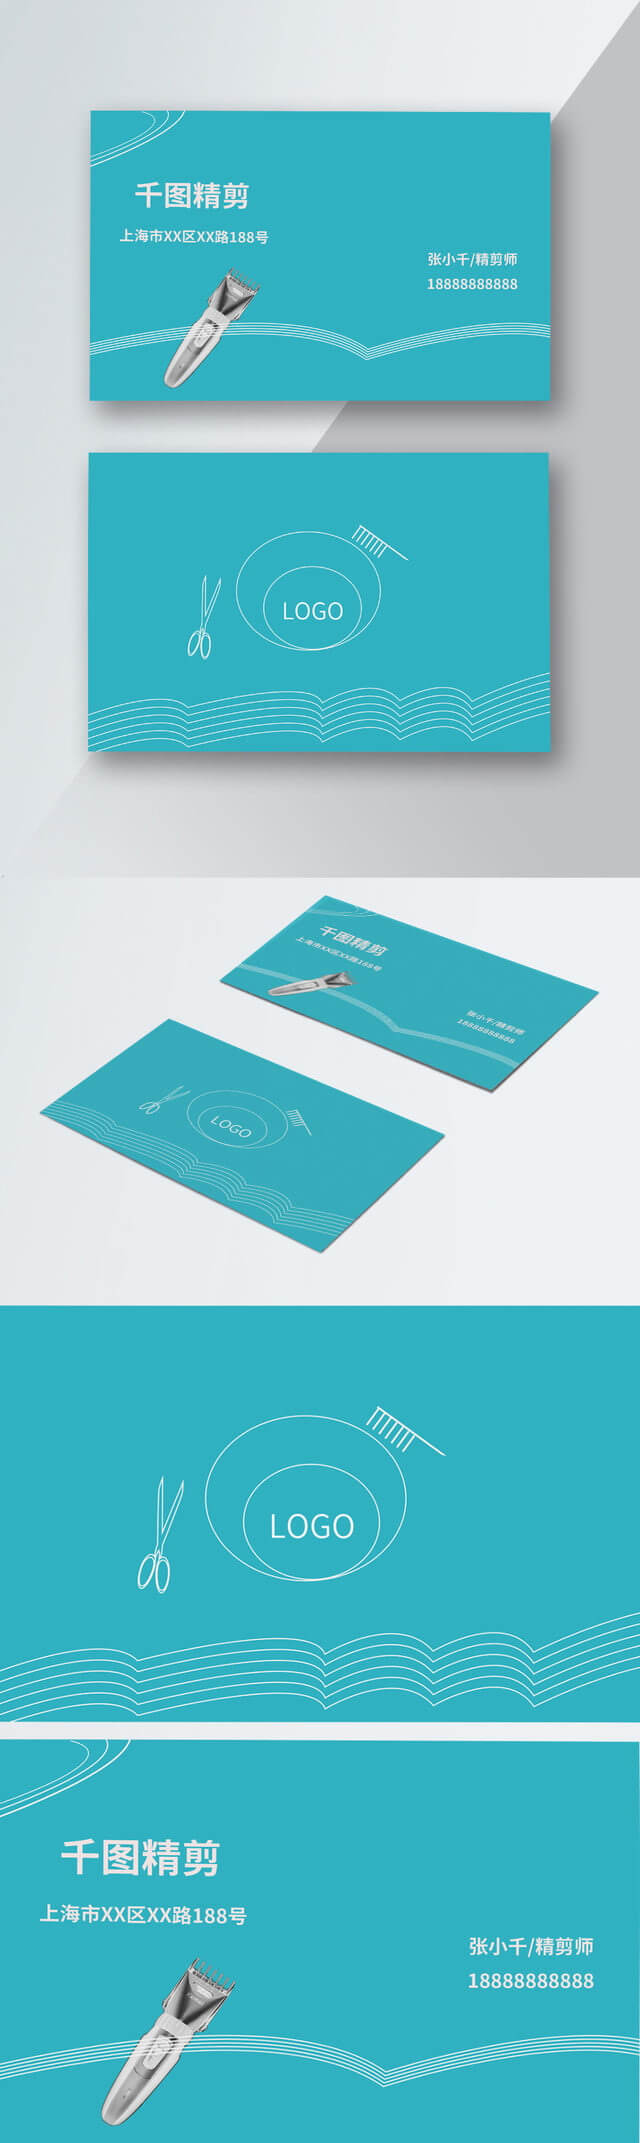 Haircut Business Card Barber Shop Business Card Hair Stylist For Hairdresser Business Card Templates Free